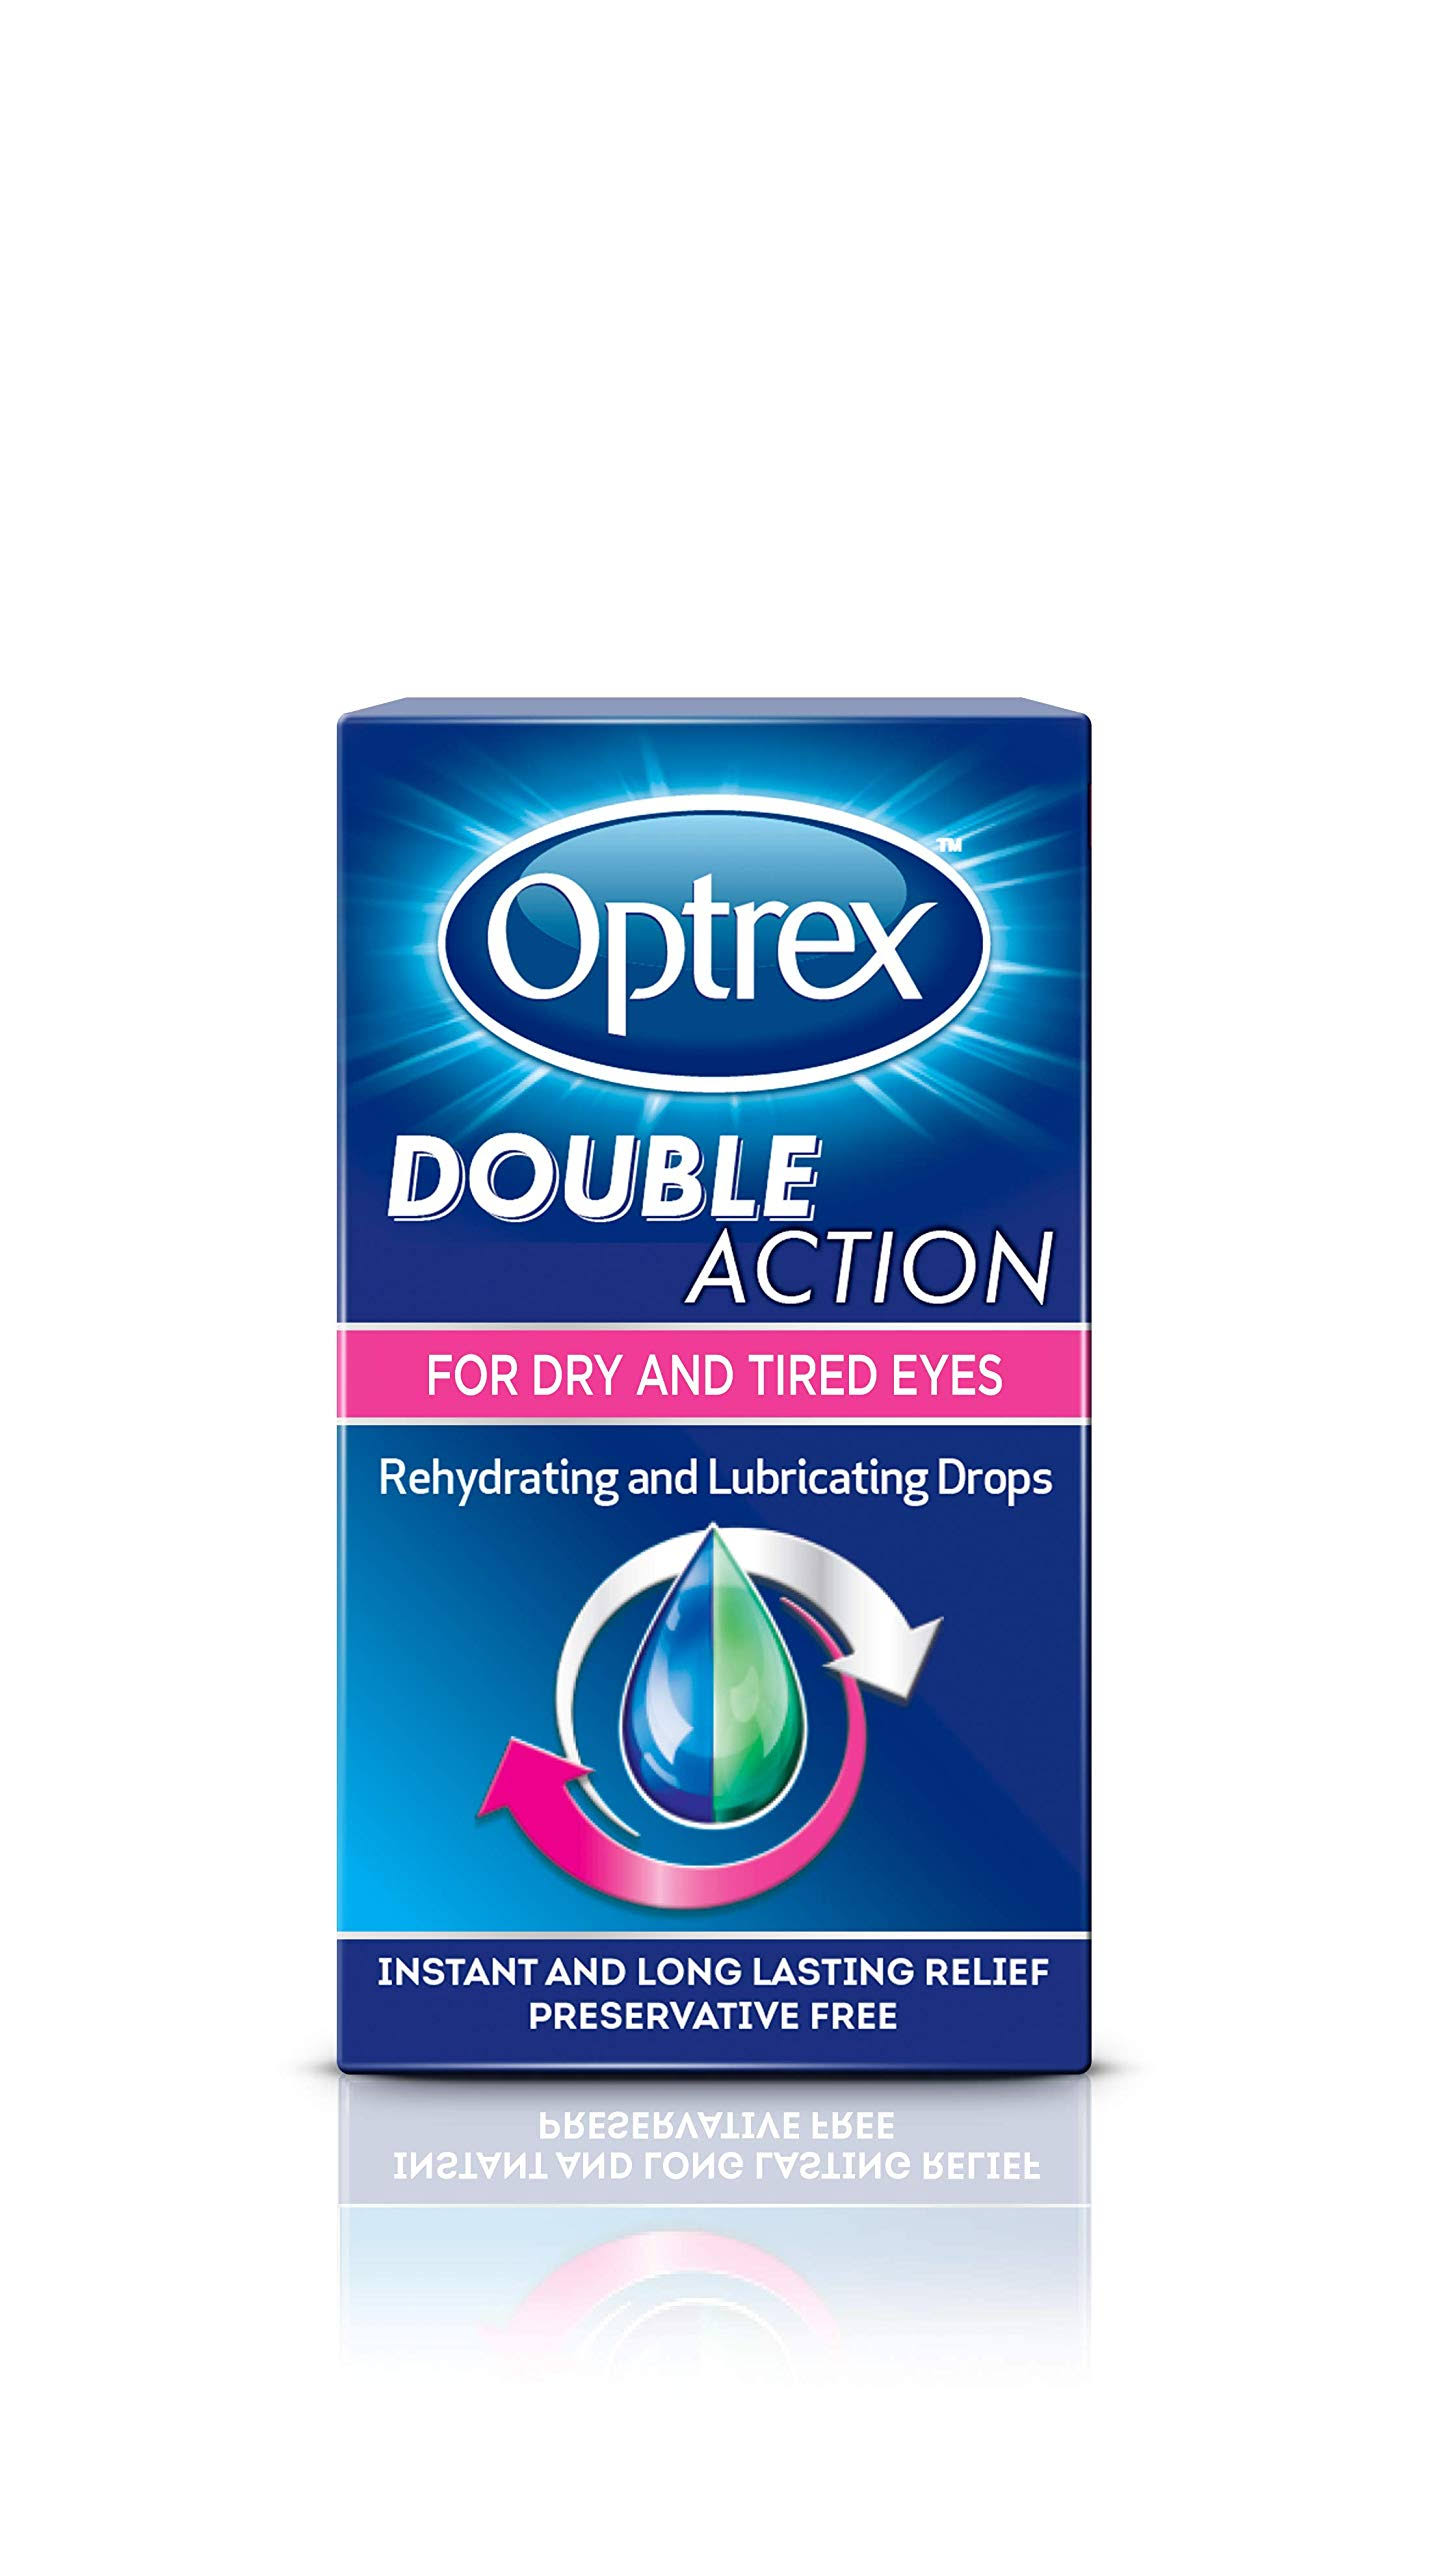 Optrex Double Action Rehydrating and Lubricating Drops - 10ml